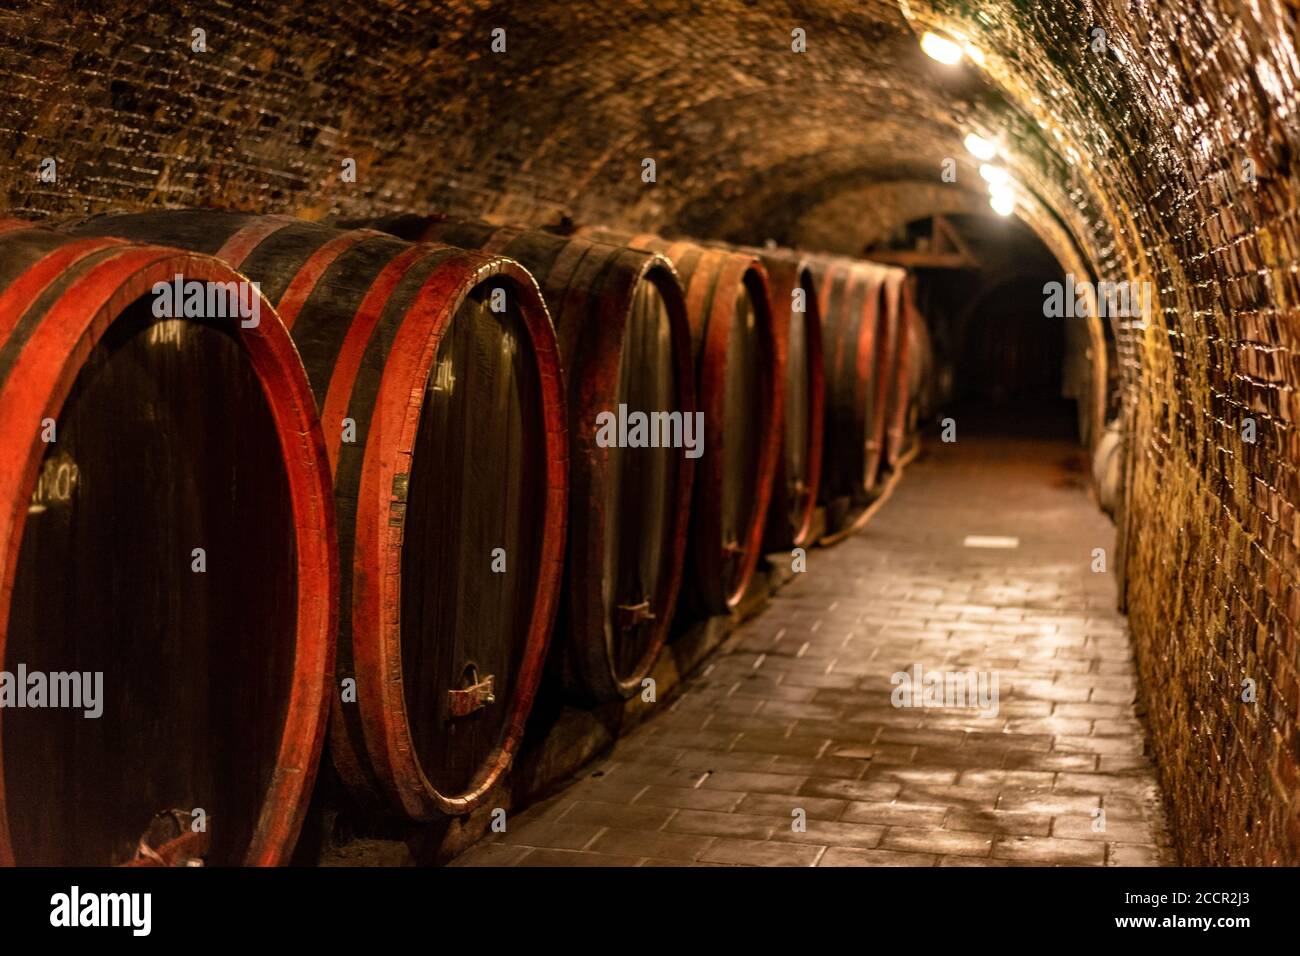 wooden old barrels in the rustic wine cellar with brick walls in villany hungary Stock Photo